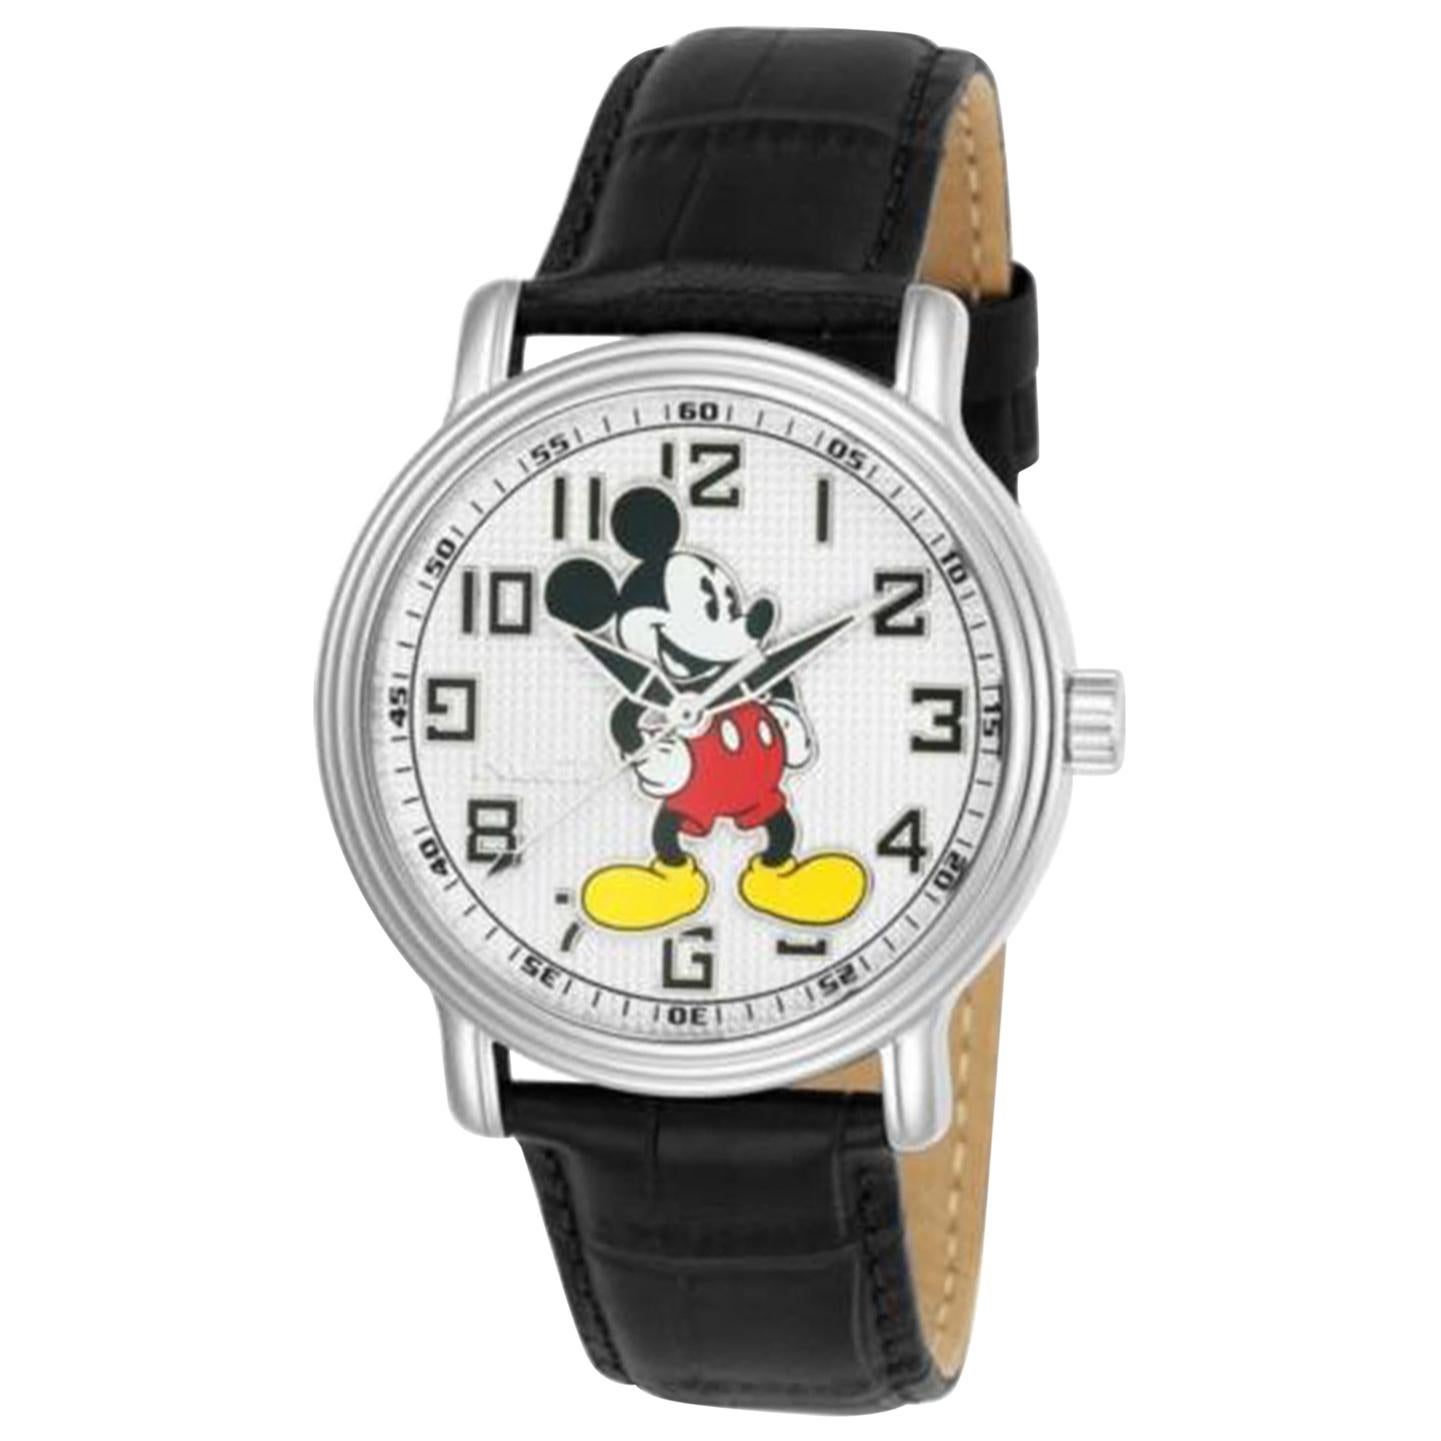 Disney Limited Edition Invicta Round Analog Mickey Mouse Watch